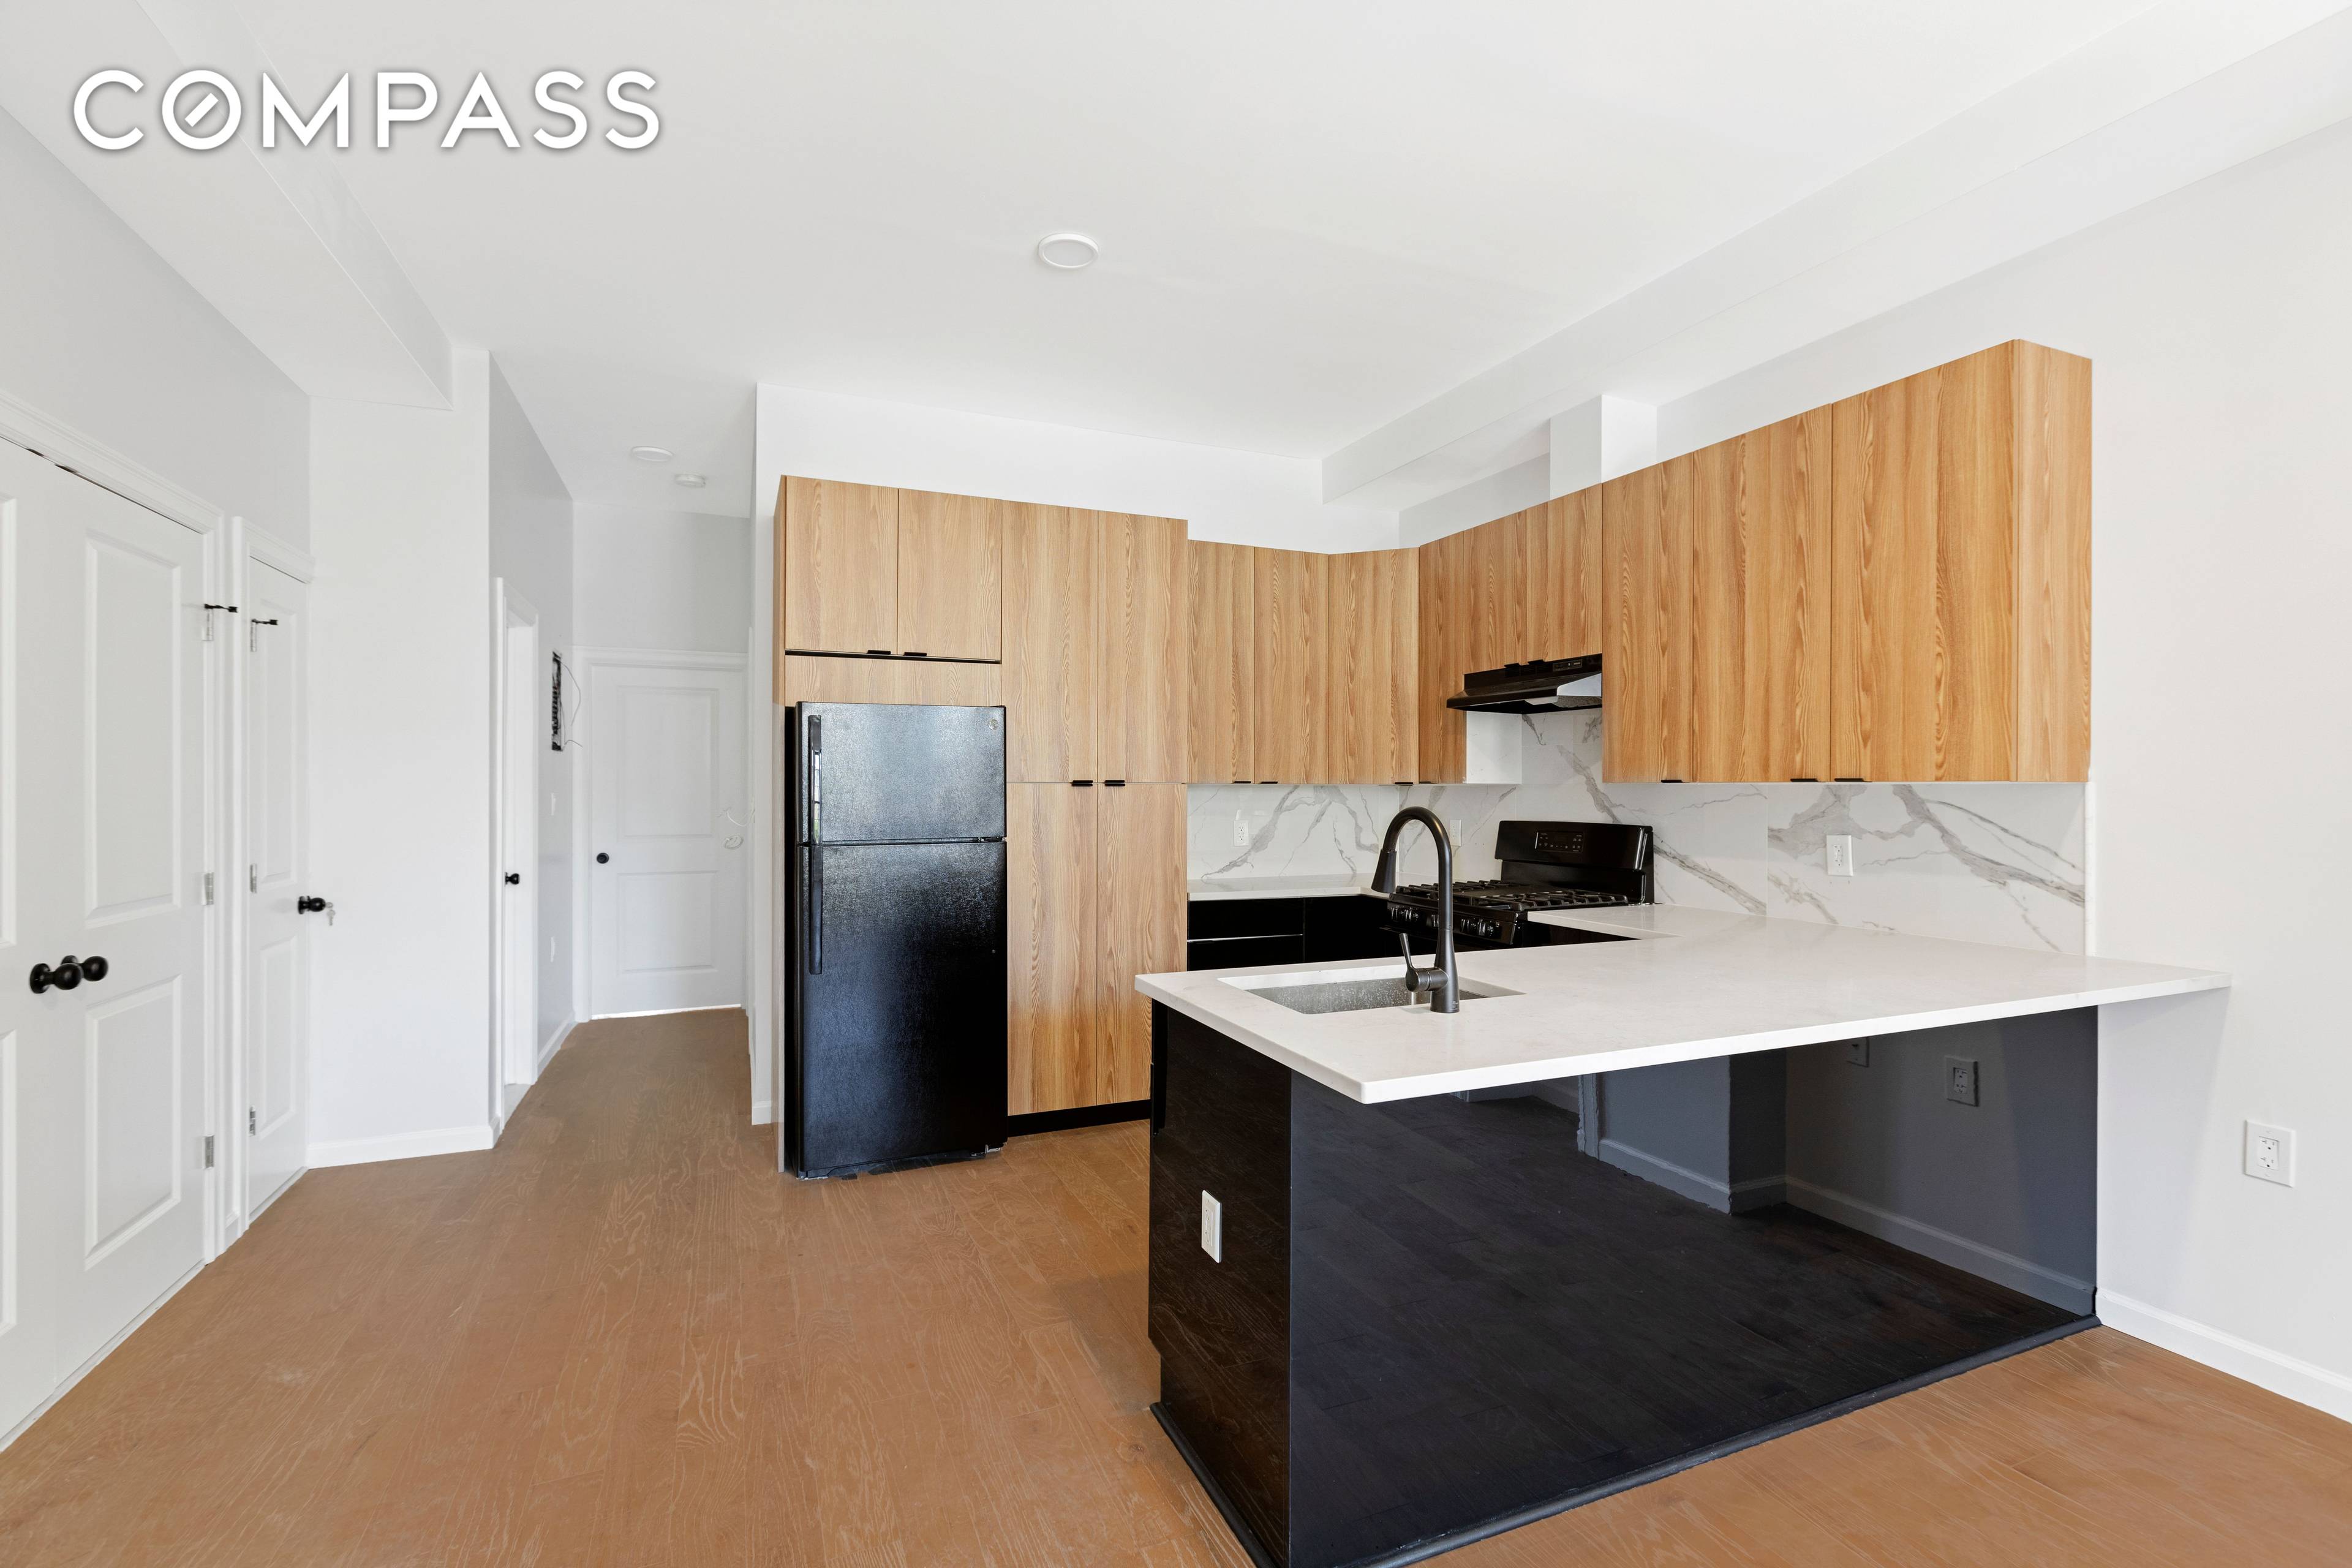 Welcome to 212 Lenox Rd, a stunning, brand new development in Prospect Lefferts Gardens.